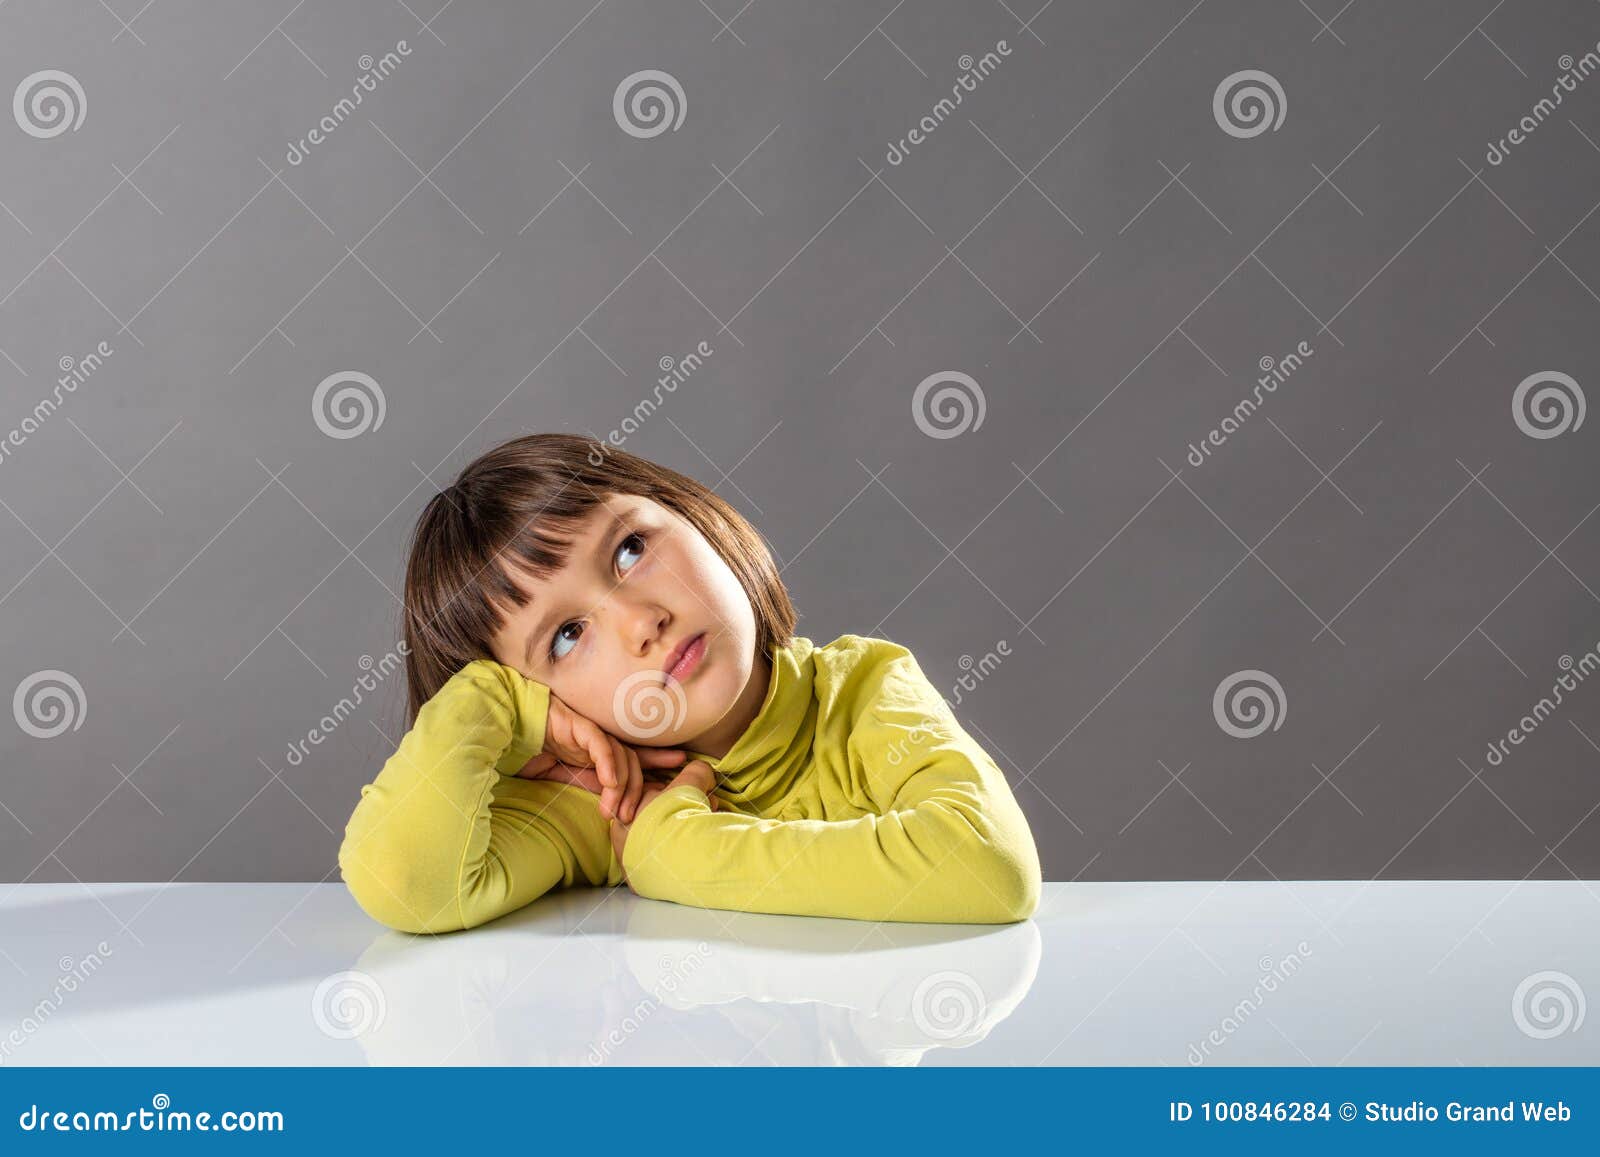 sweet pouting thinker looking away for concept of kid boredom